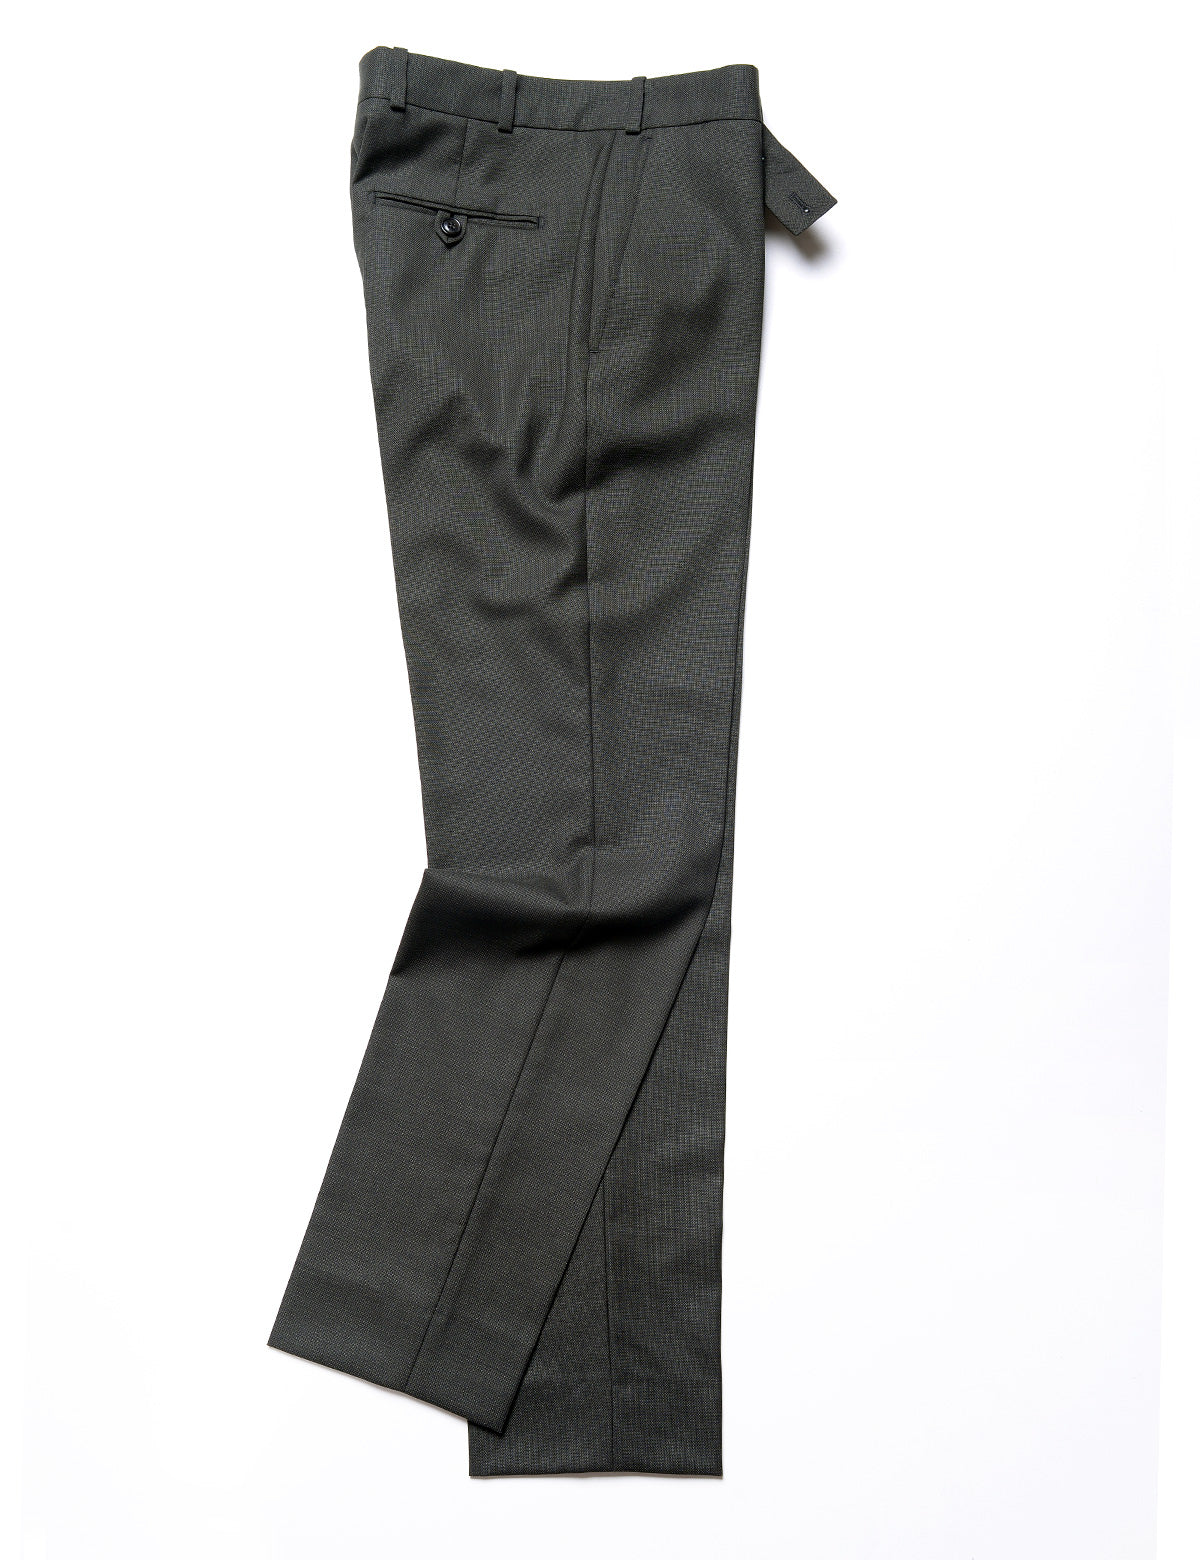 Brooklyn Tailors BKT50 Tailored Trousers in Textured Wool - Wrought Iron full length flat shot